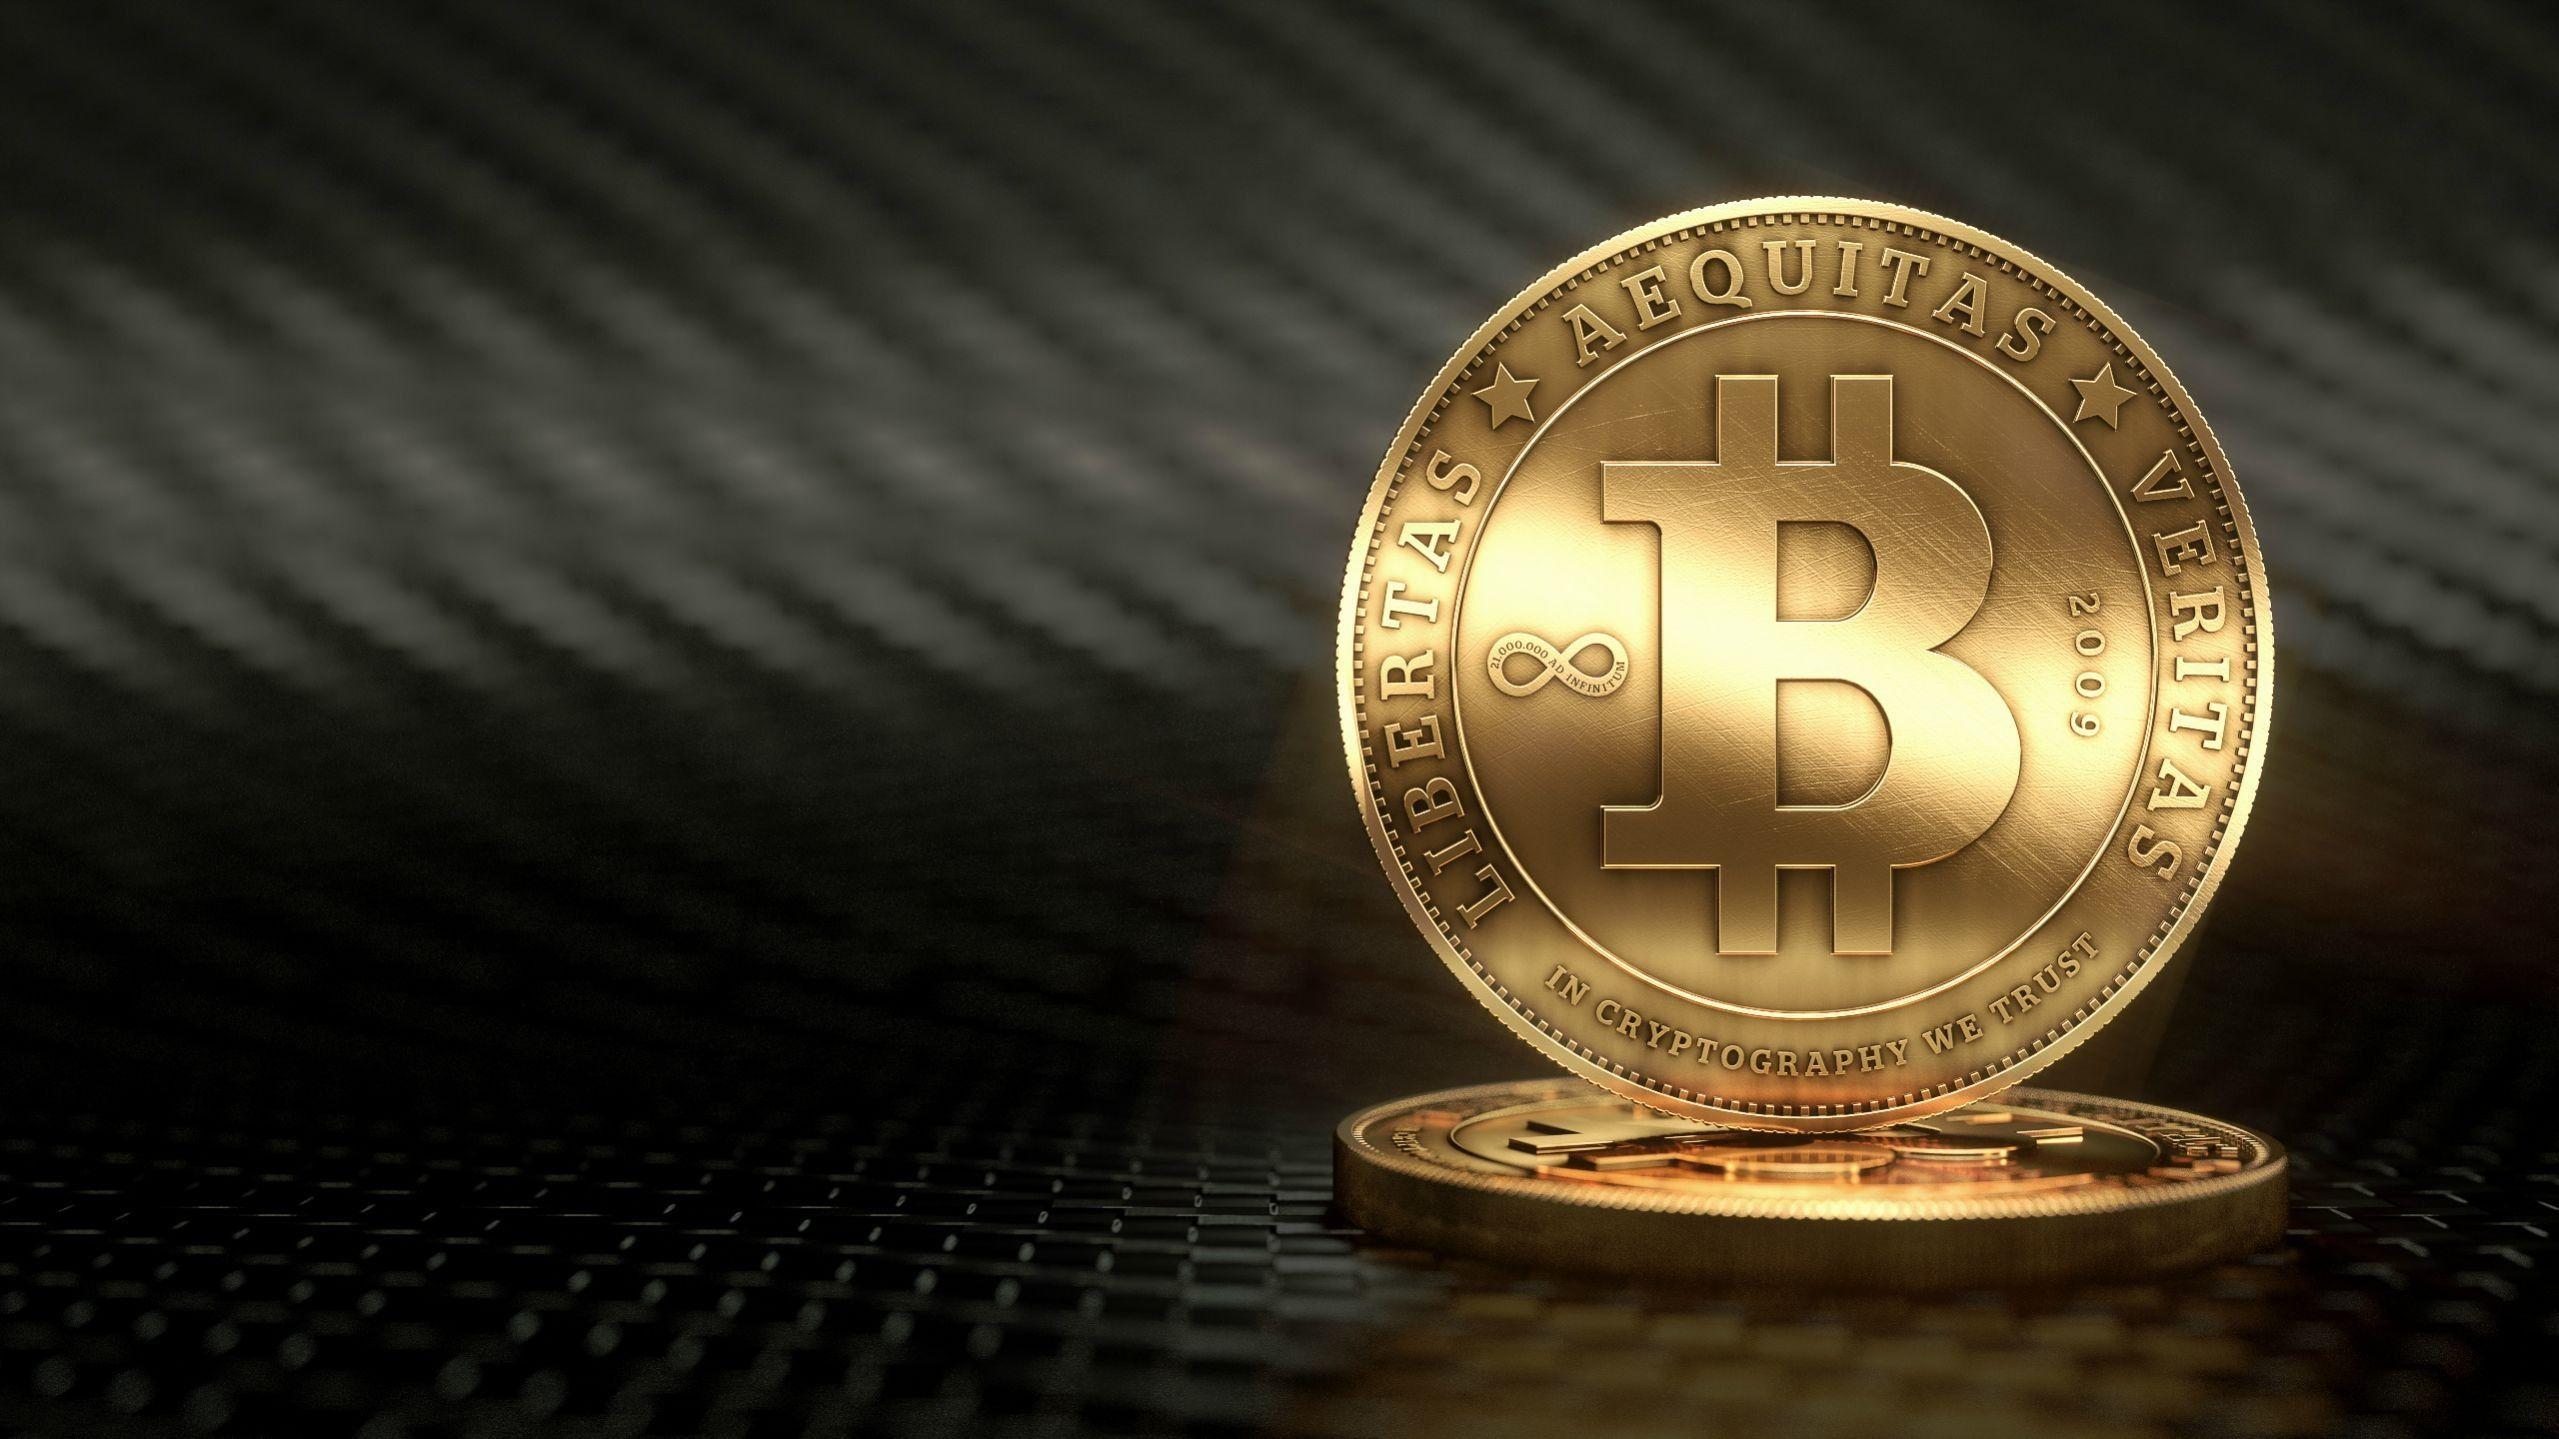 Gold Coin Bitcoin wallpaper and image, picture, photo